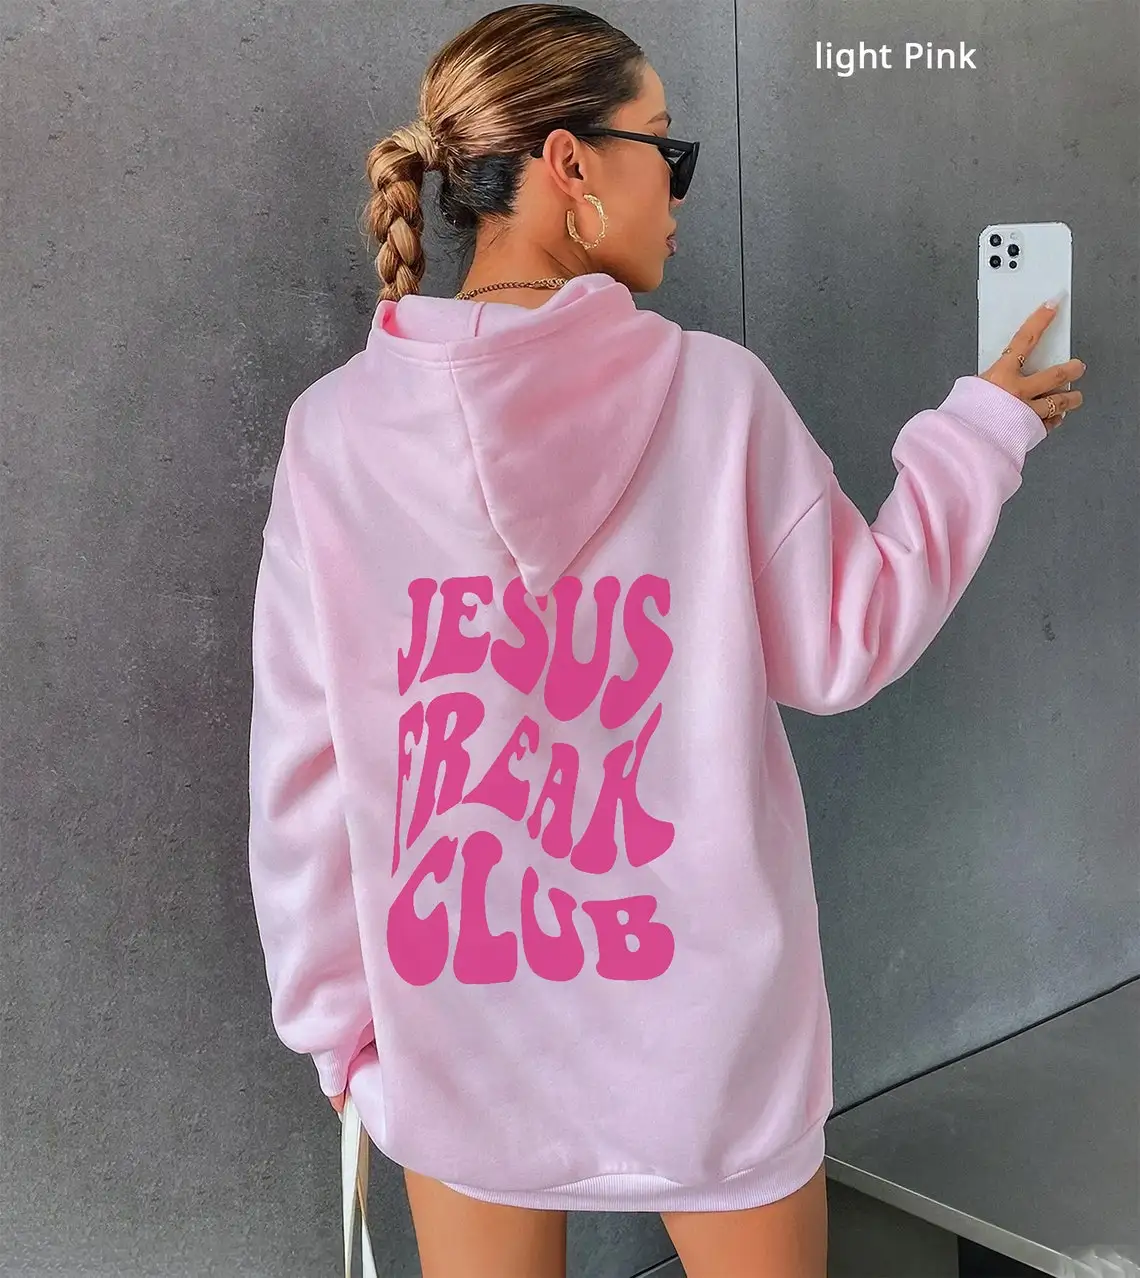 Jesus Freak Club Crewneck Christian hoodie jesus religion church party street style slogan party youngs pullovers art tops